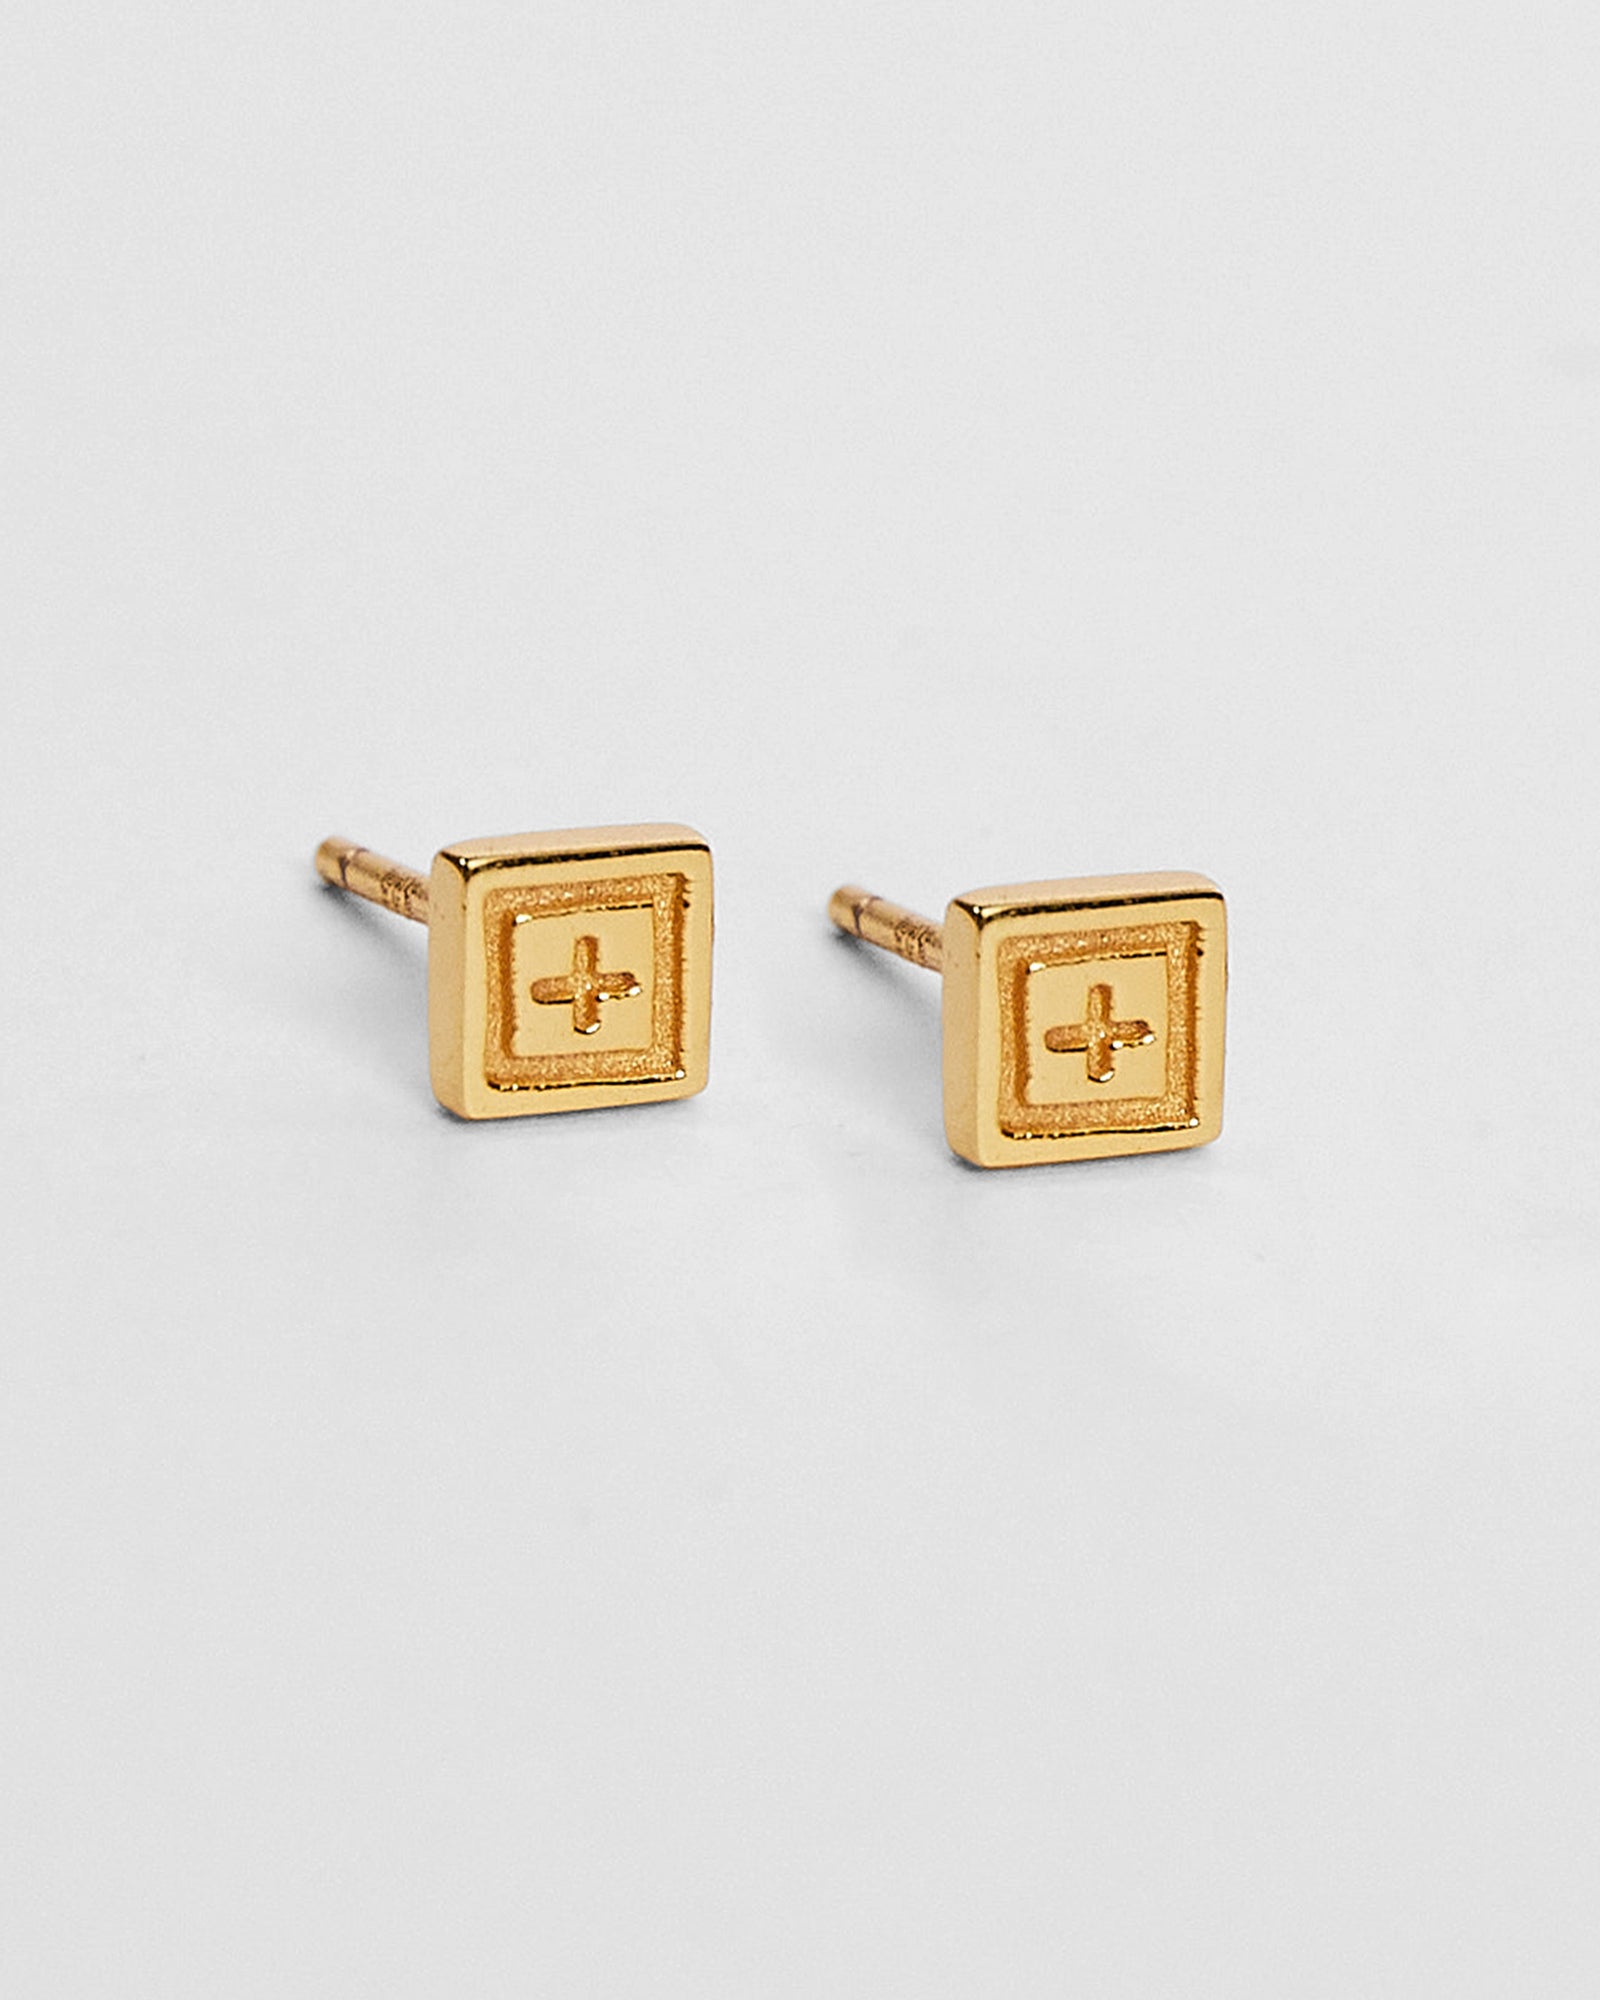 Classic Unisex LV Logo Small Stud Earrings, 18k Gold Plated, Hypoallergenic  Jewelry Gift